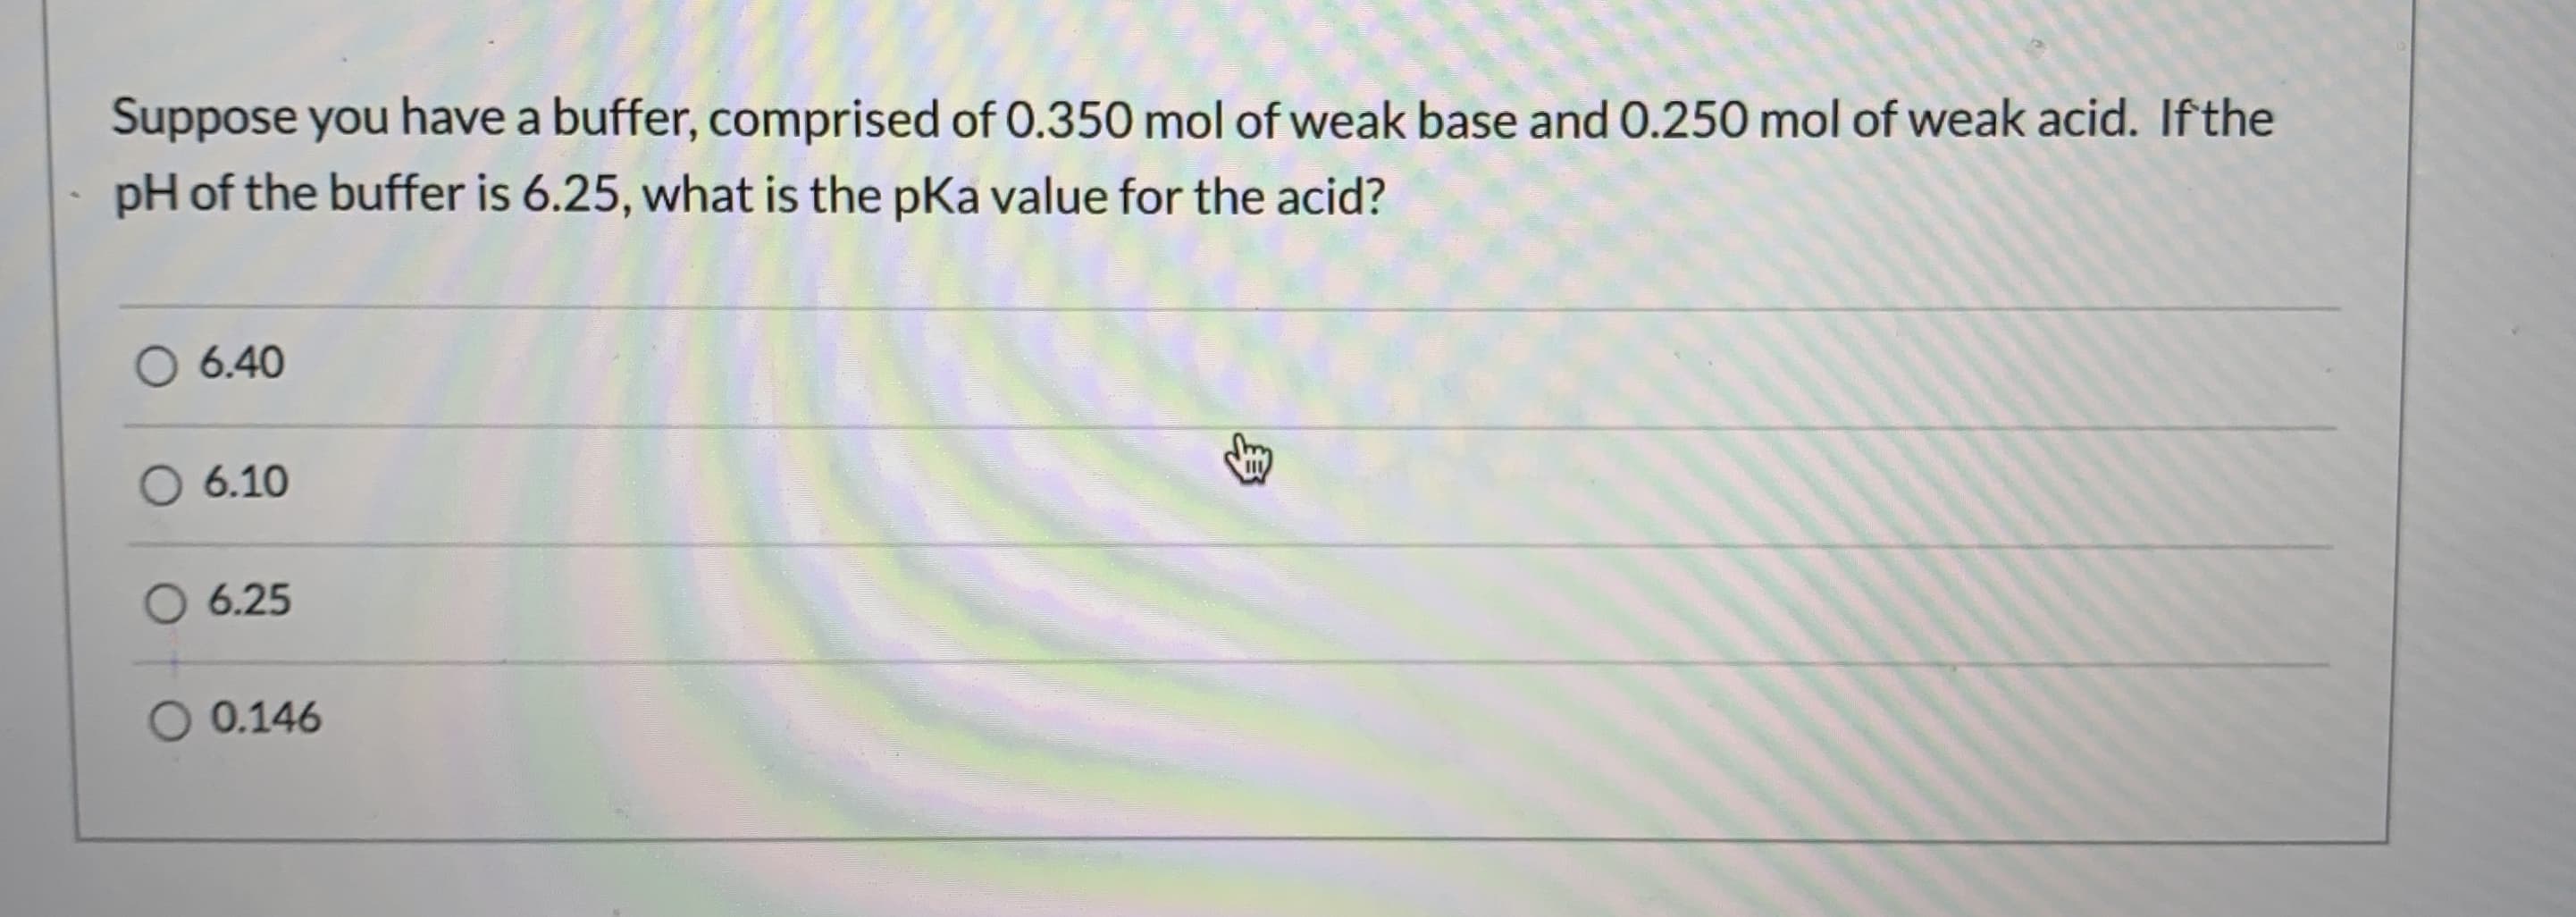 Suppose you have a buffer, comprised of 0.350 mol of weak base and 0.250 mol of weak acid. Ifthe
pH of the buffer is 6.25, what is the pKa value for the acid?
6.40
6.10
6.25
O 0.146
